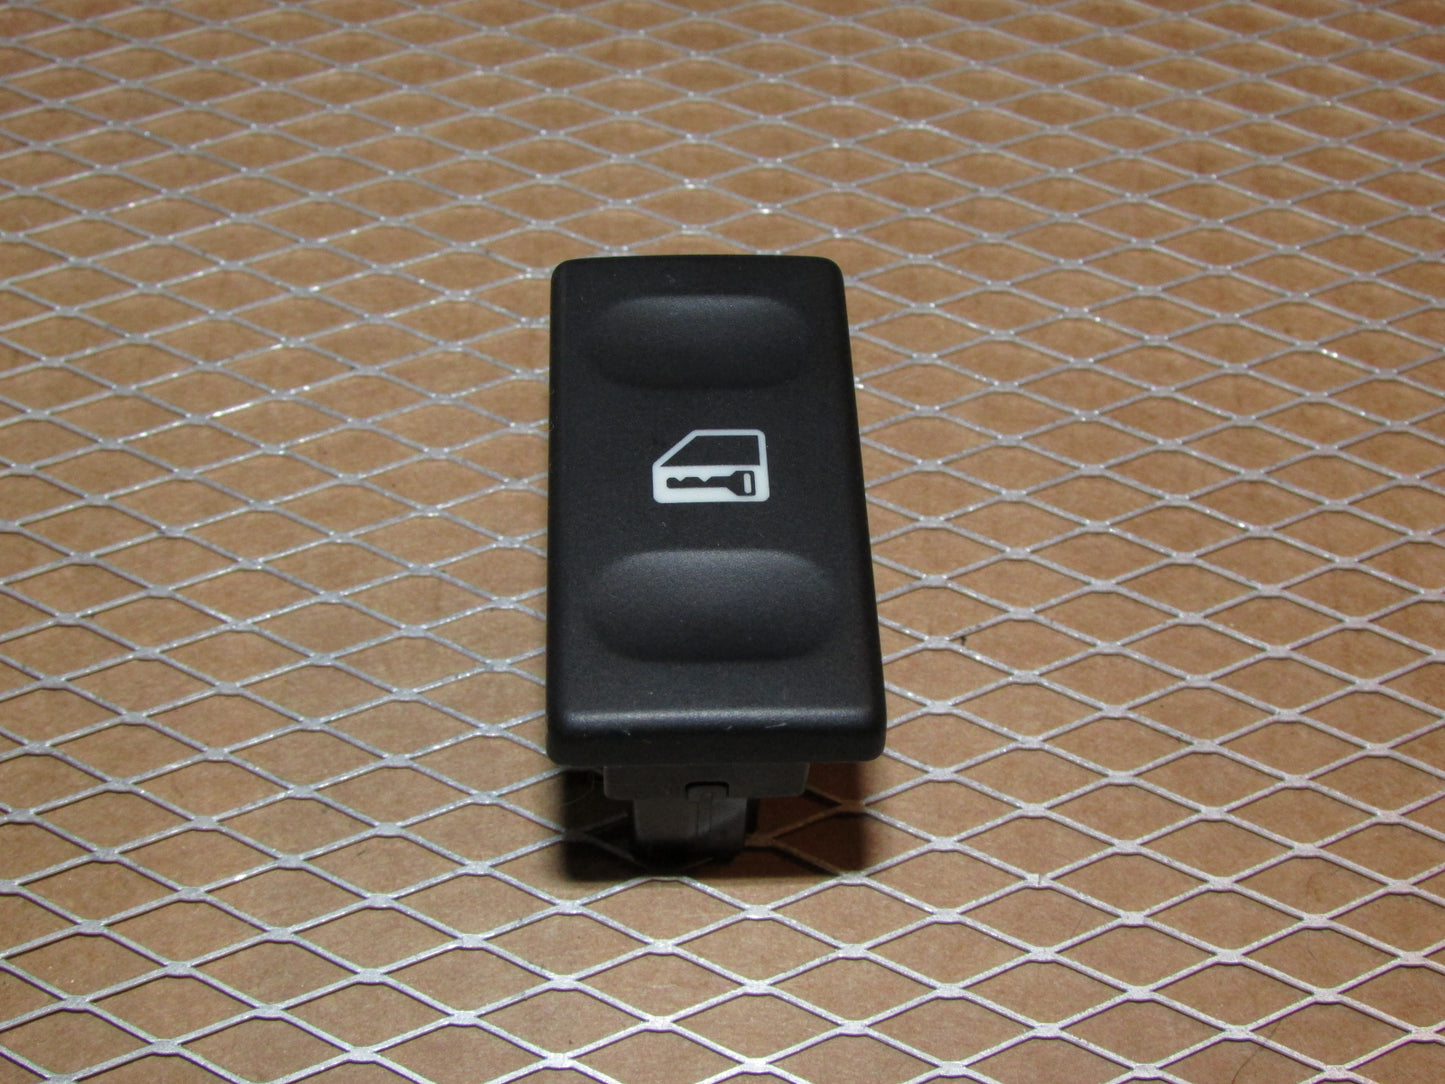 03 04 Land Rover Discovery 2 OEM Dash Power Door Lock Switch